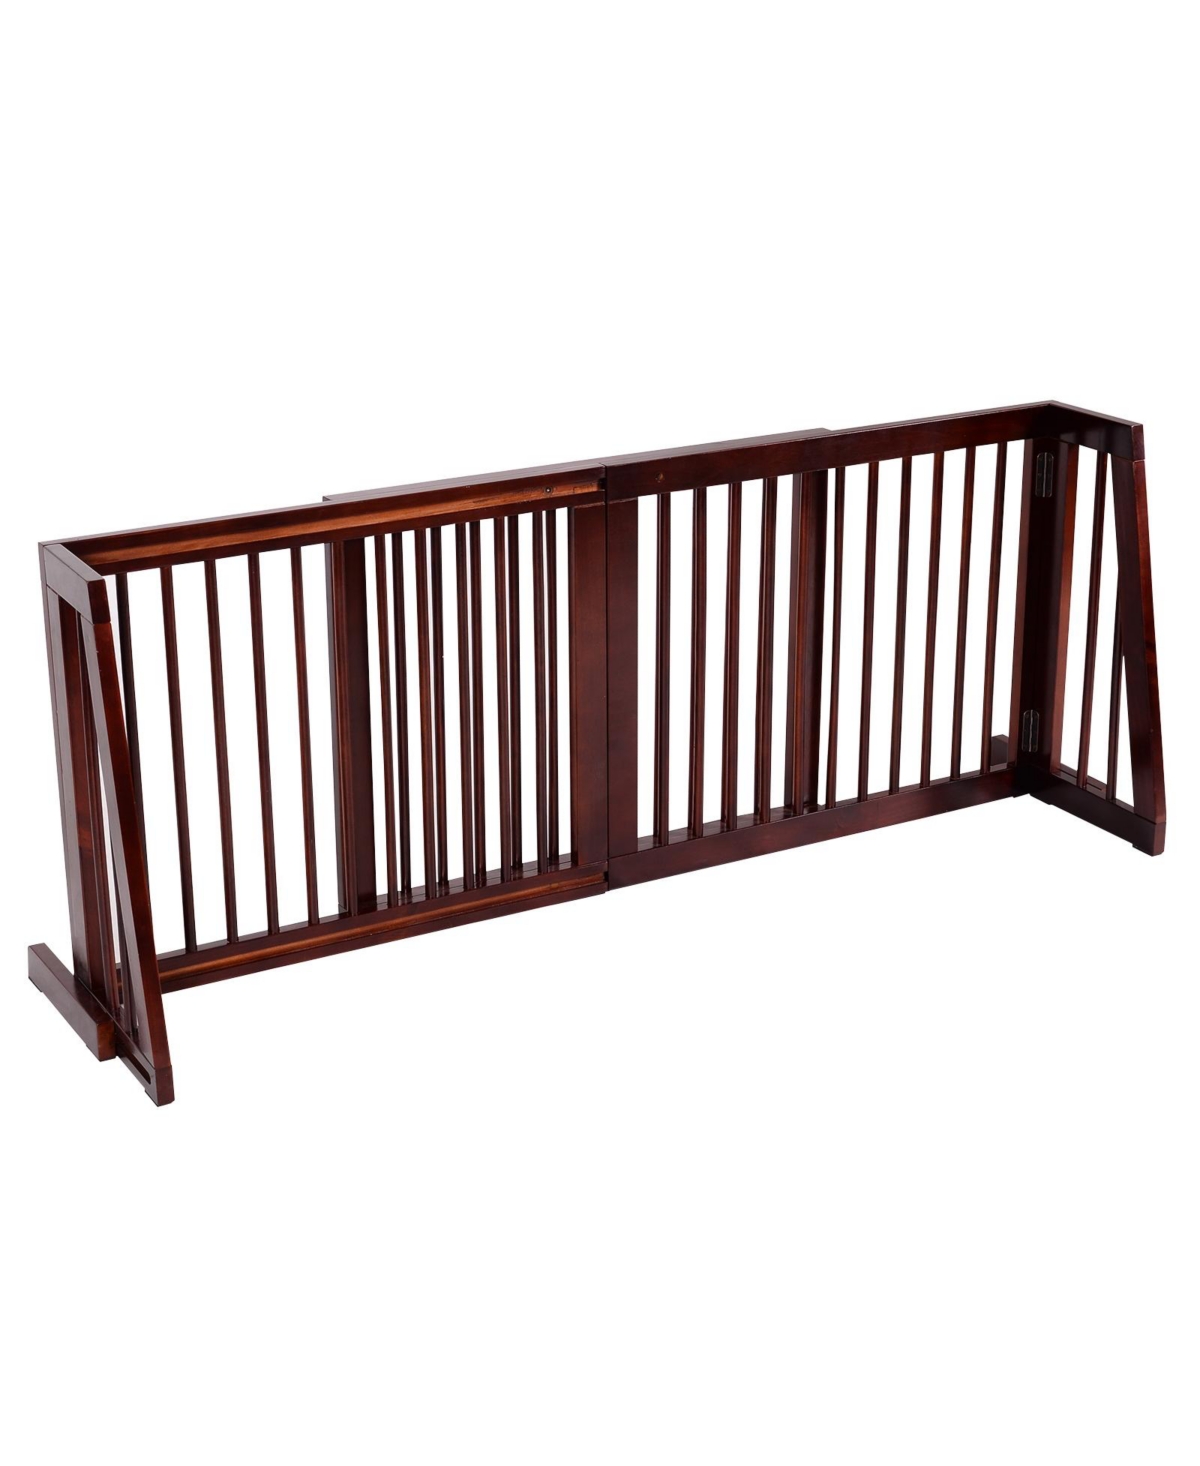 30 Inch Configurable Folding 4 Panel Wood Fence - Brown